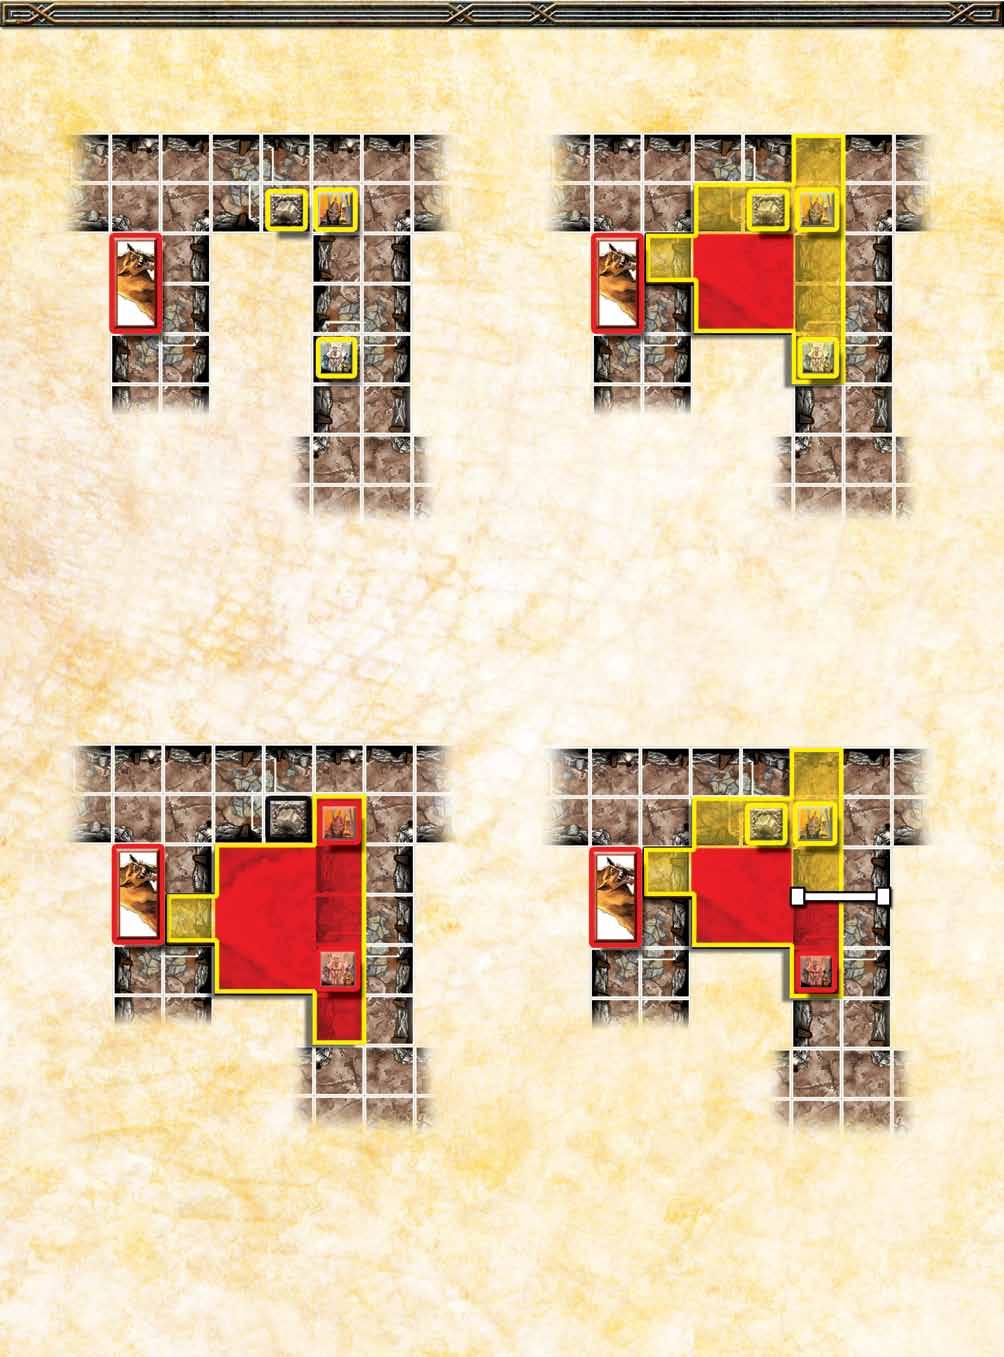 Breath Attack Blocking Examples The diagram above shows how a section of the dungeon looks just before a Hell Hound makes a Breath attack.